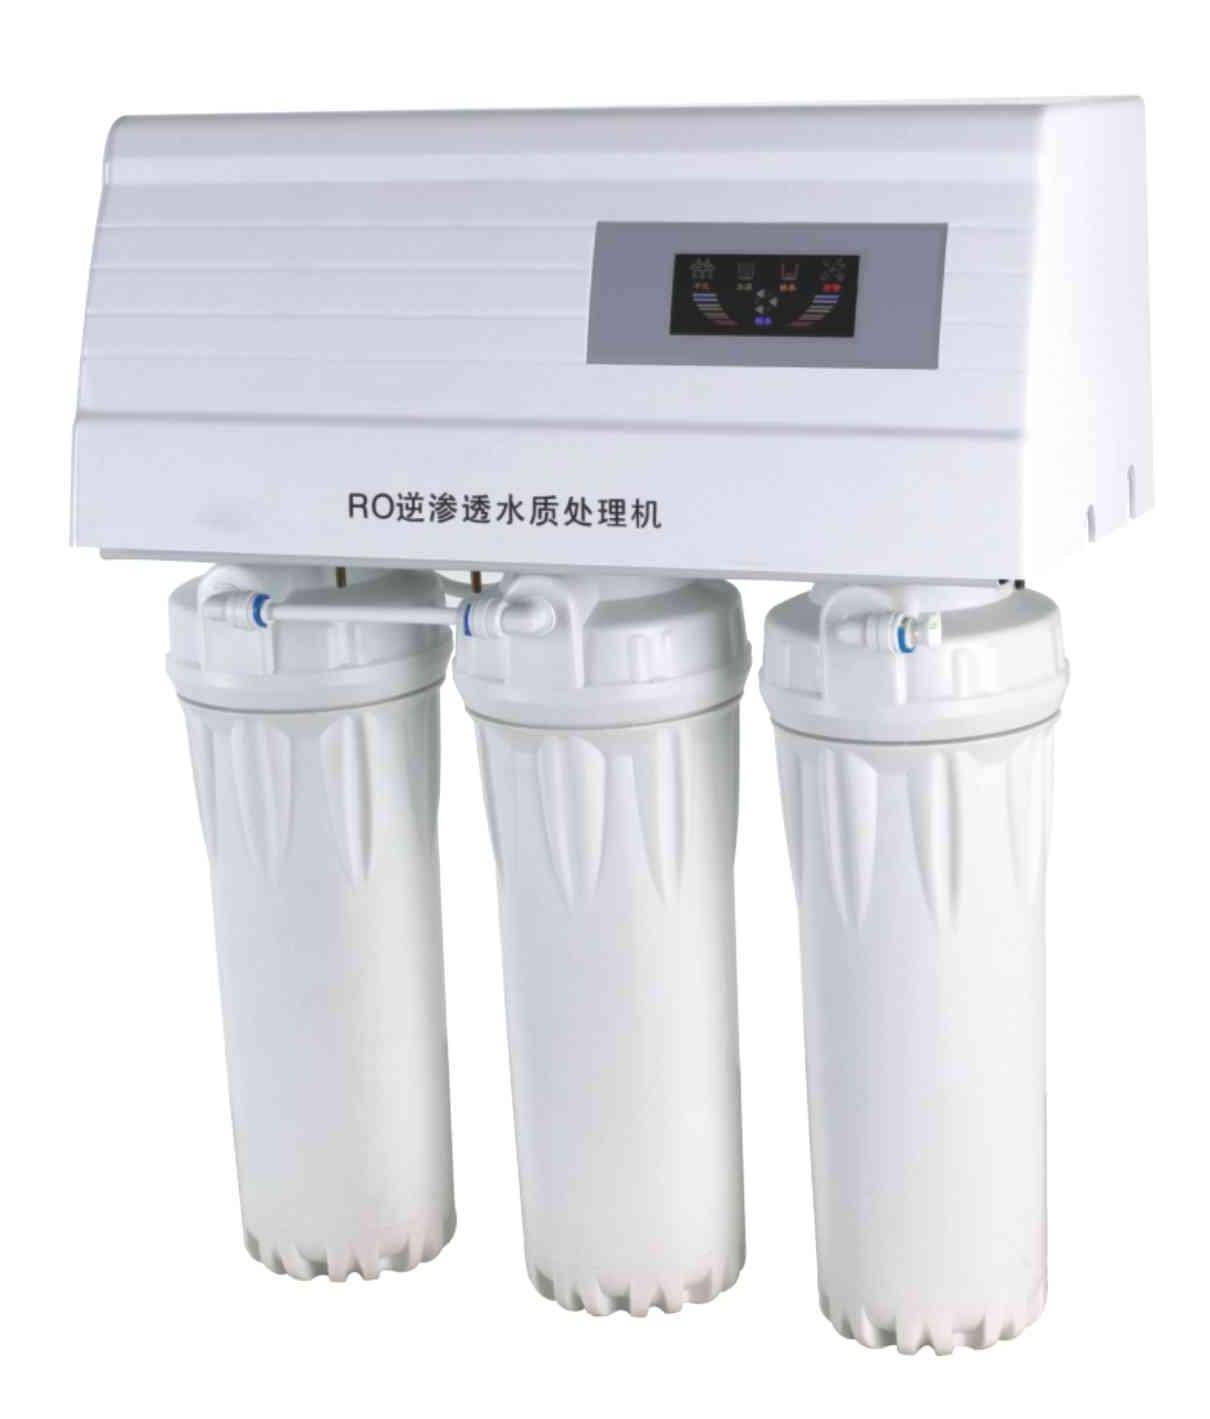  Water Filters (Handsel-ROZ-50C1) Manufactures